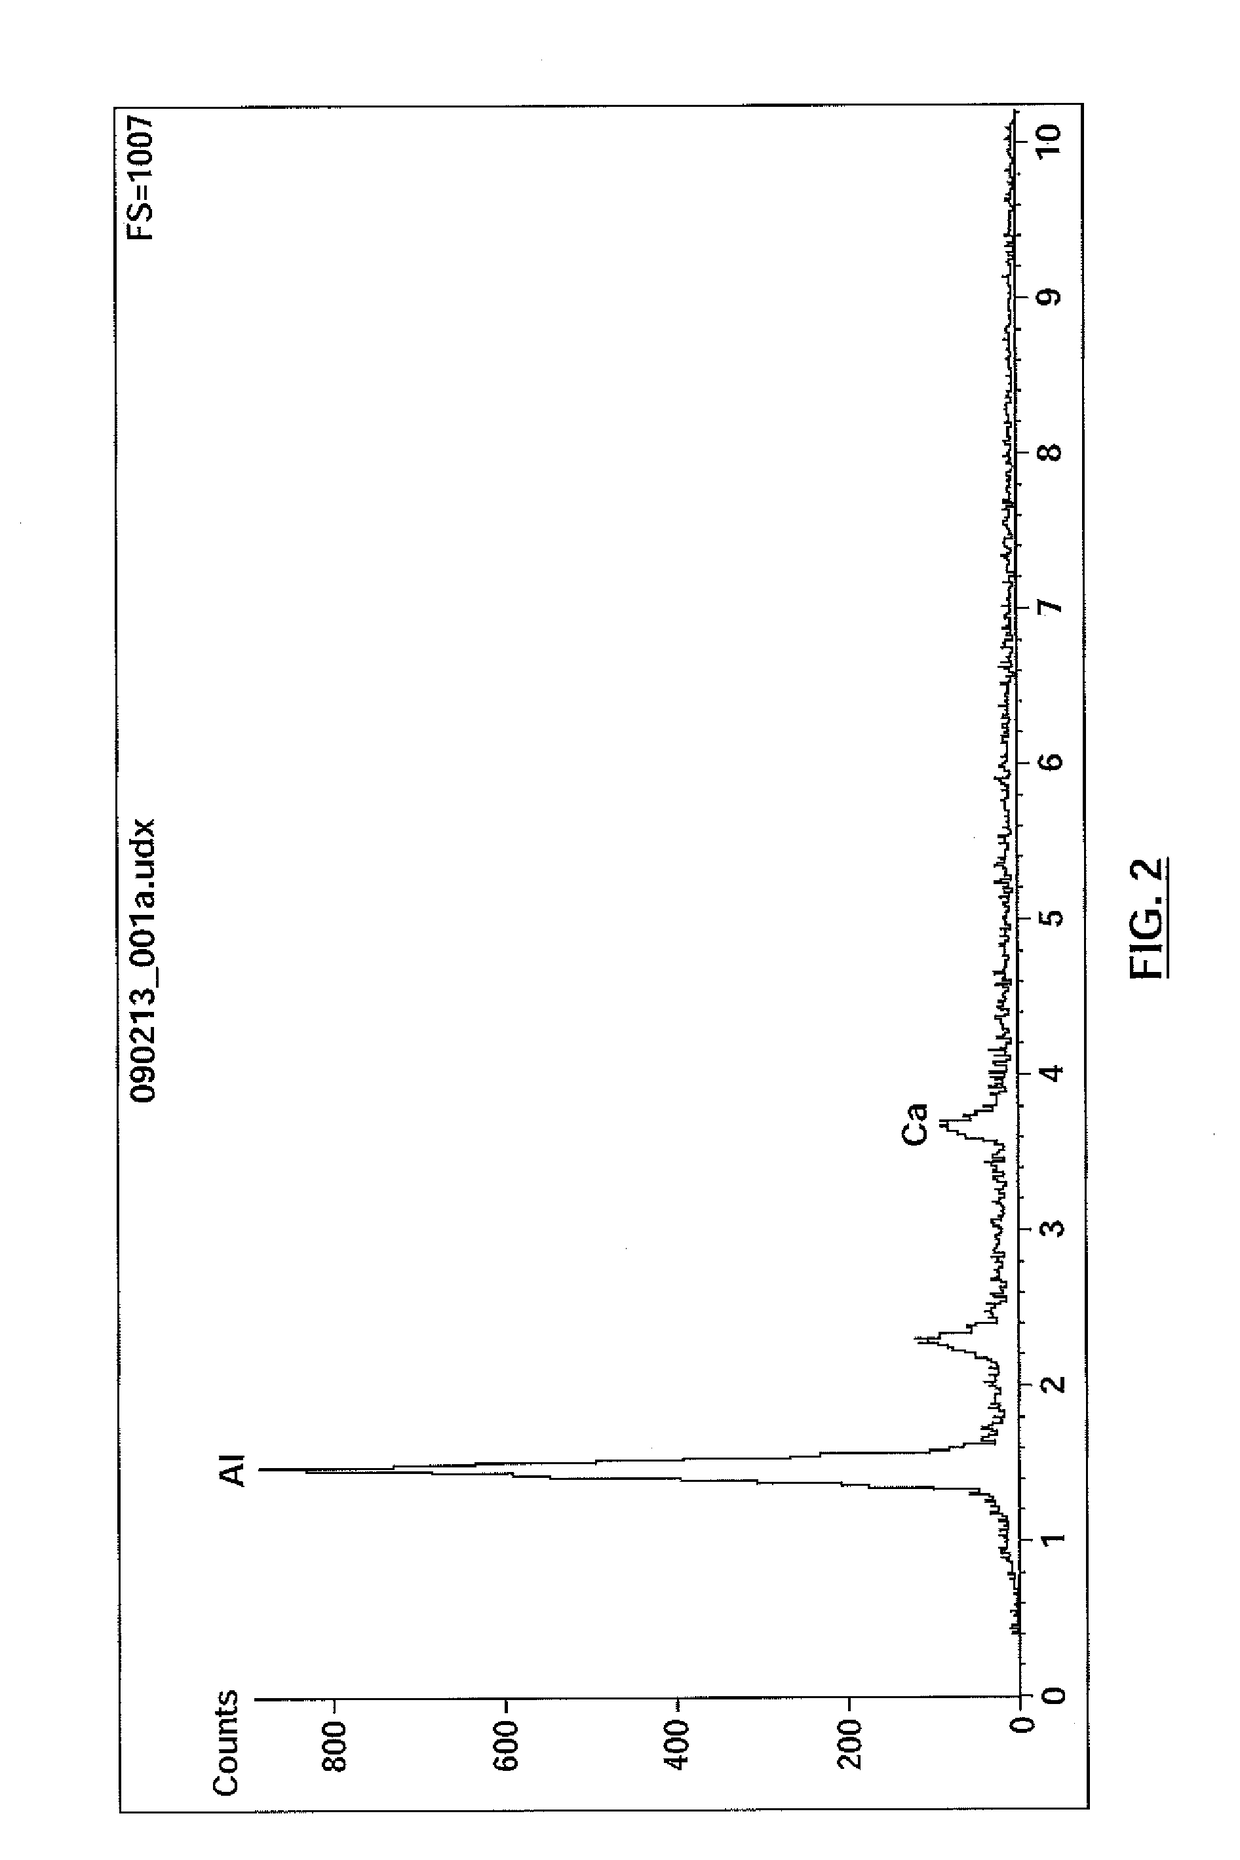 Resin for precipitation of minerals and salts, methods of manufacture and uses thereof